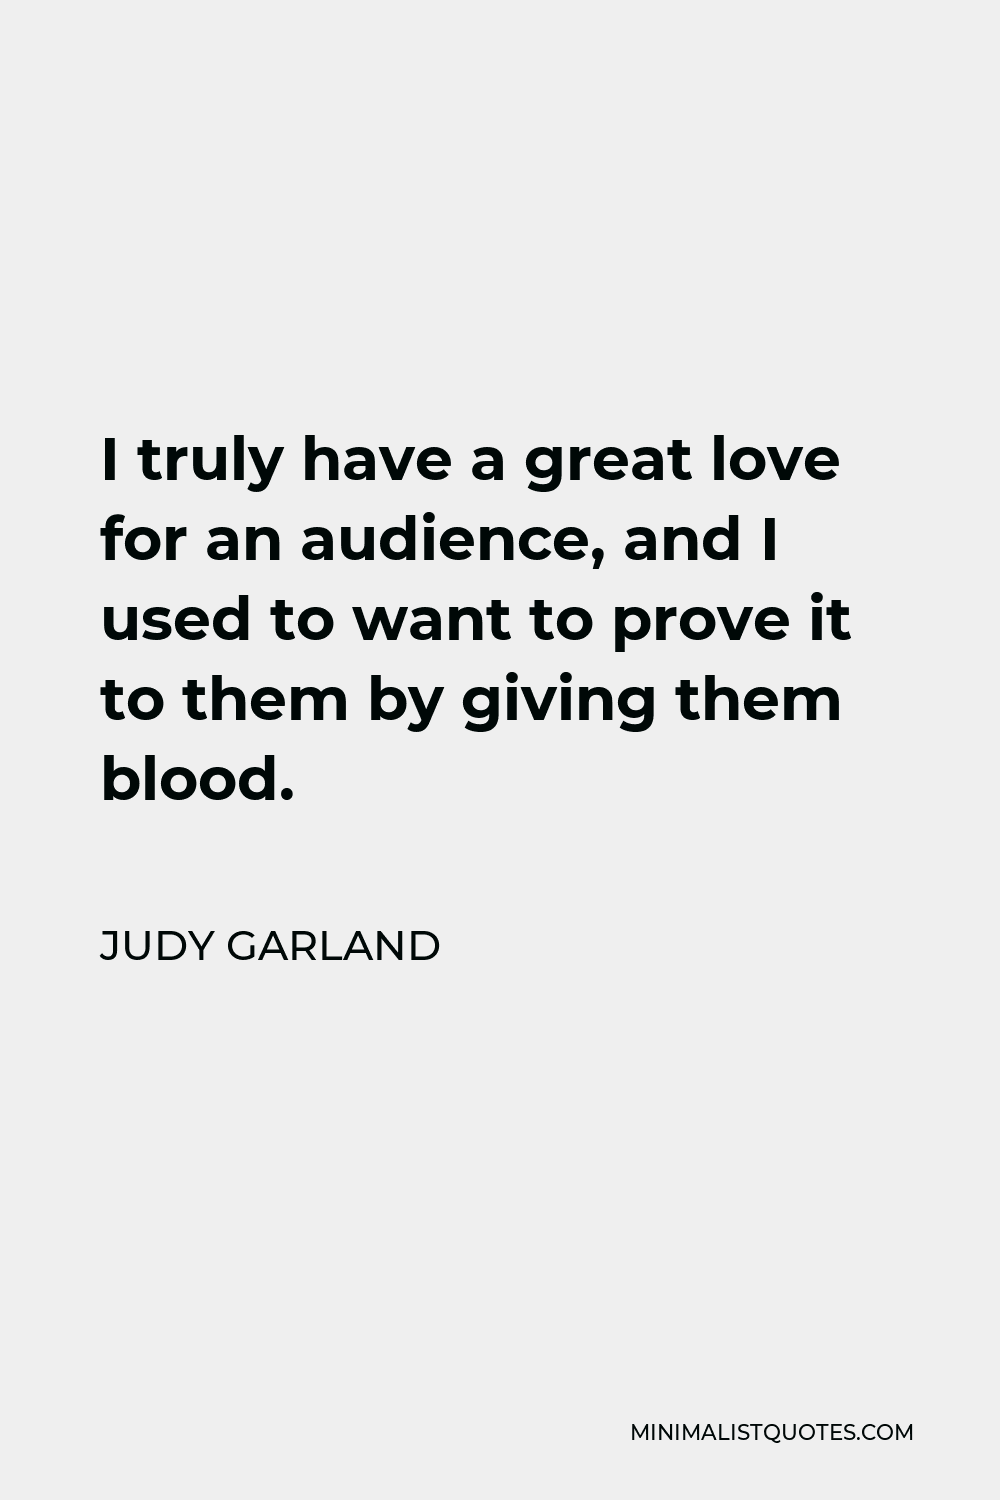 Judy Garland Quote - I truly have a great love for an audience, and I used to want to prove it to them by giving them blood.